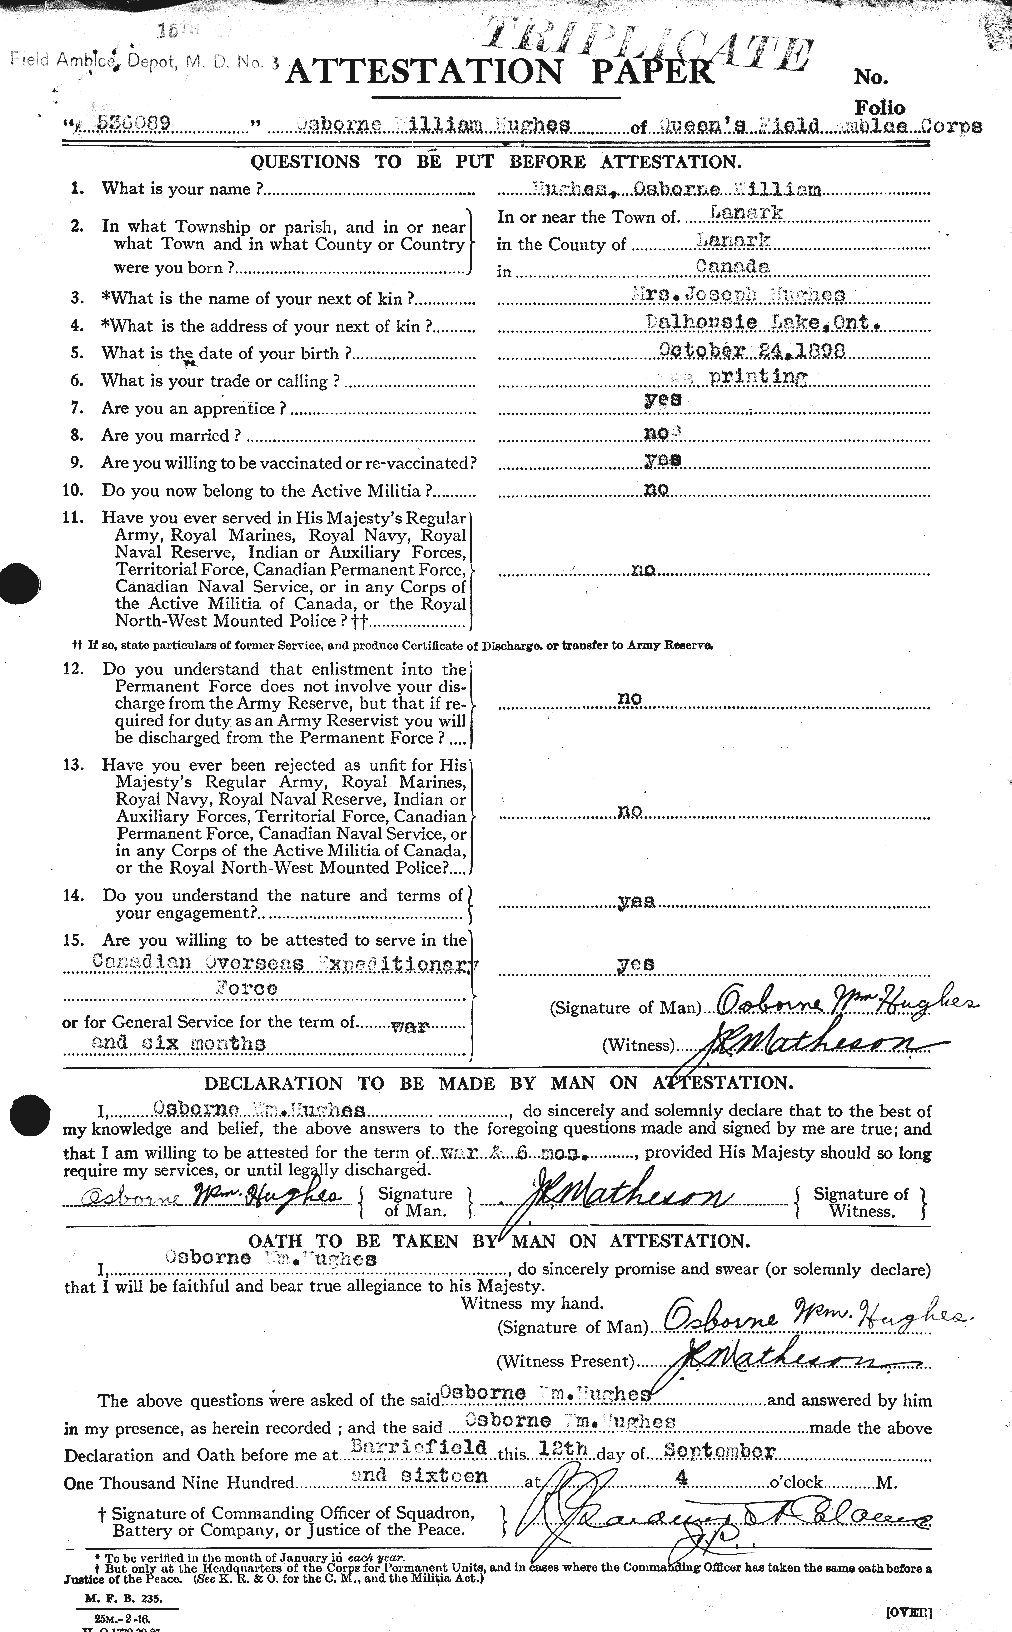 Personnel Records of the First World War - CEF 404137a